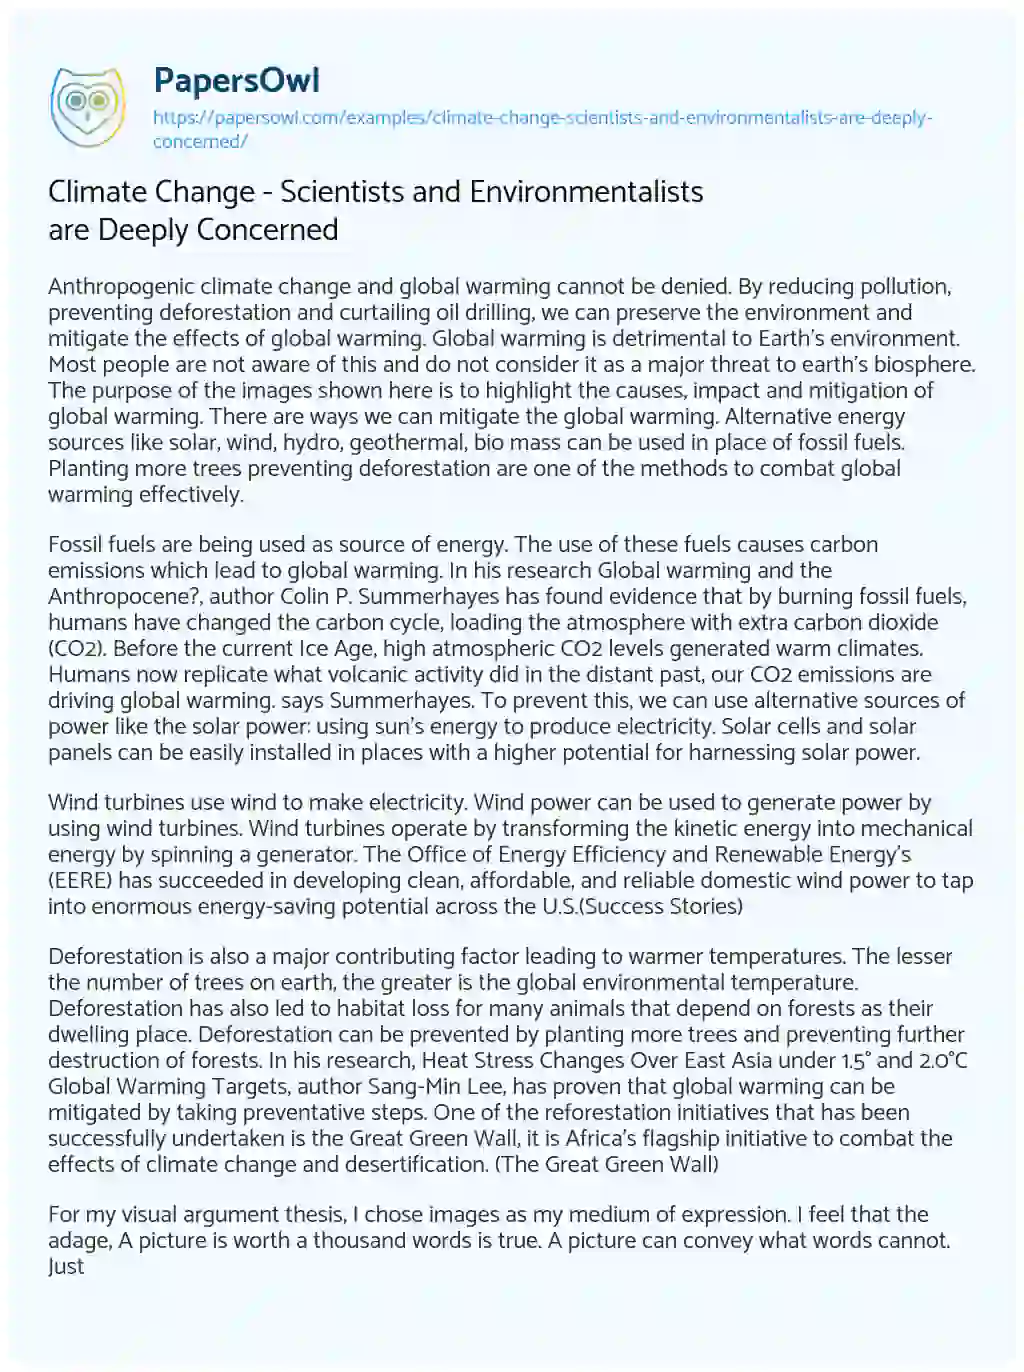 Climate Change – Scientists and Environmentalists are Deeply Concerned essay